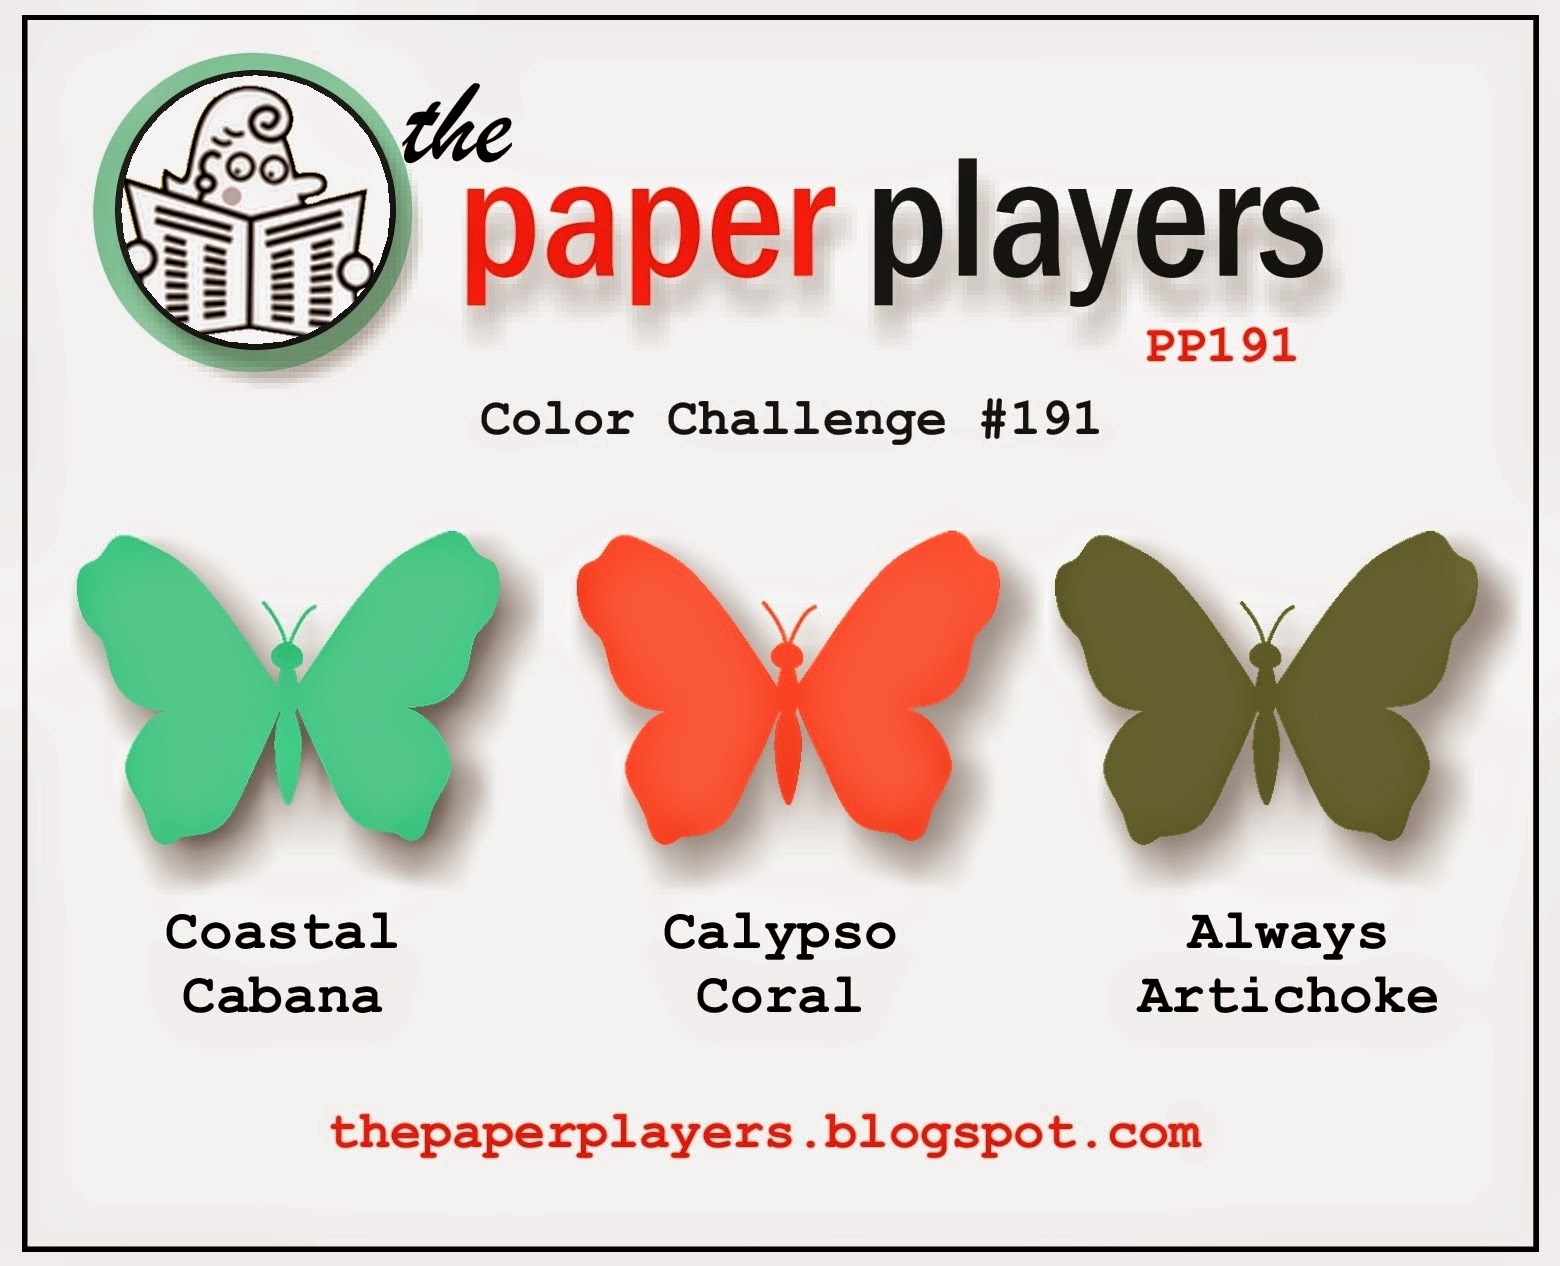 http://thepaperplayers.blogspot.ca/2014/04/paper-players-191-color-challenge-from.html